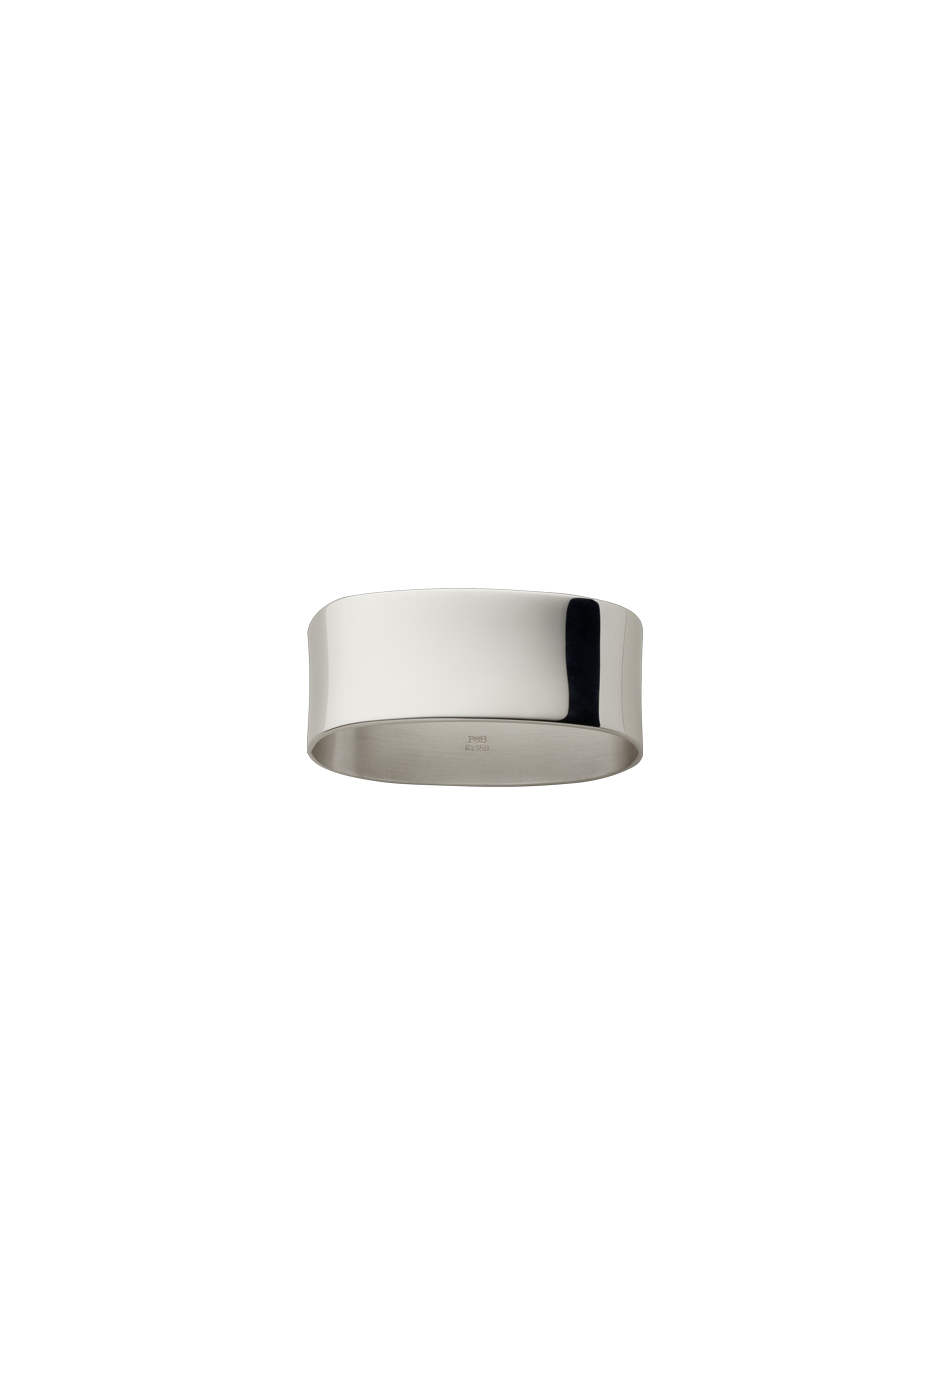 Eclipse Table Napkin Ring (150g massive silverplated)